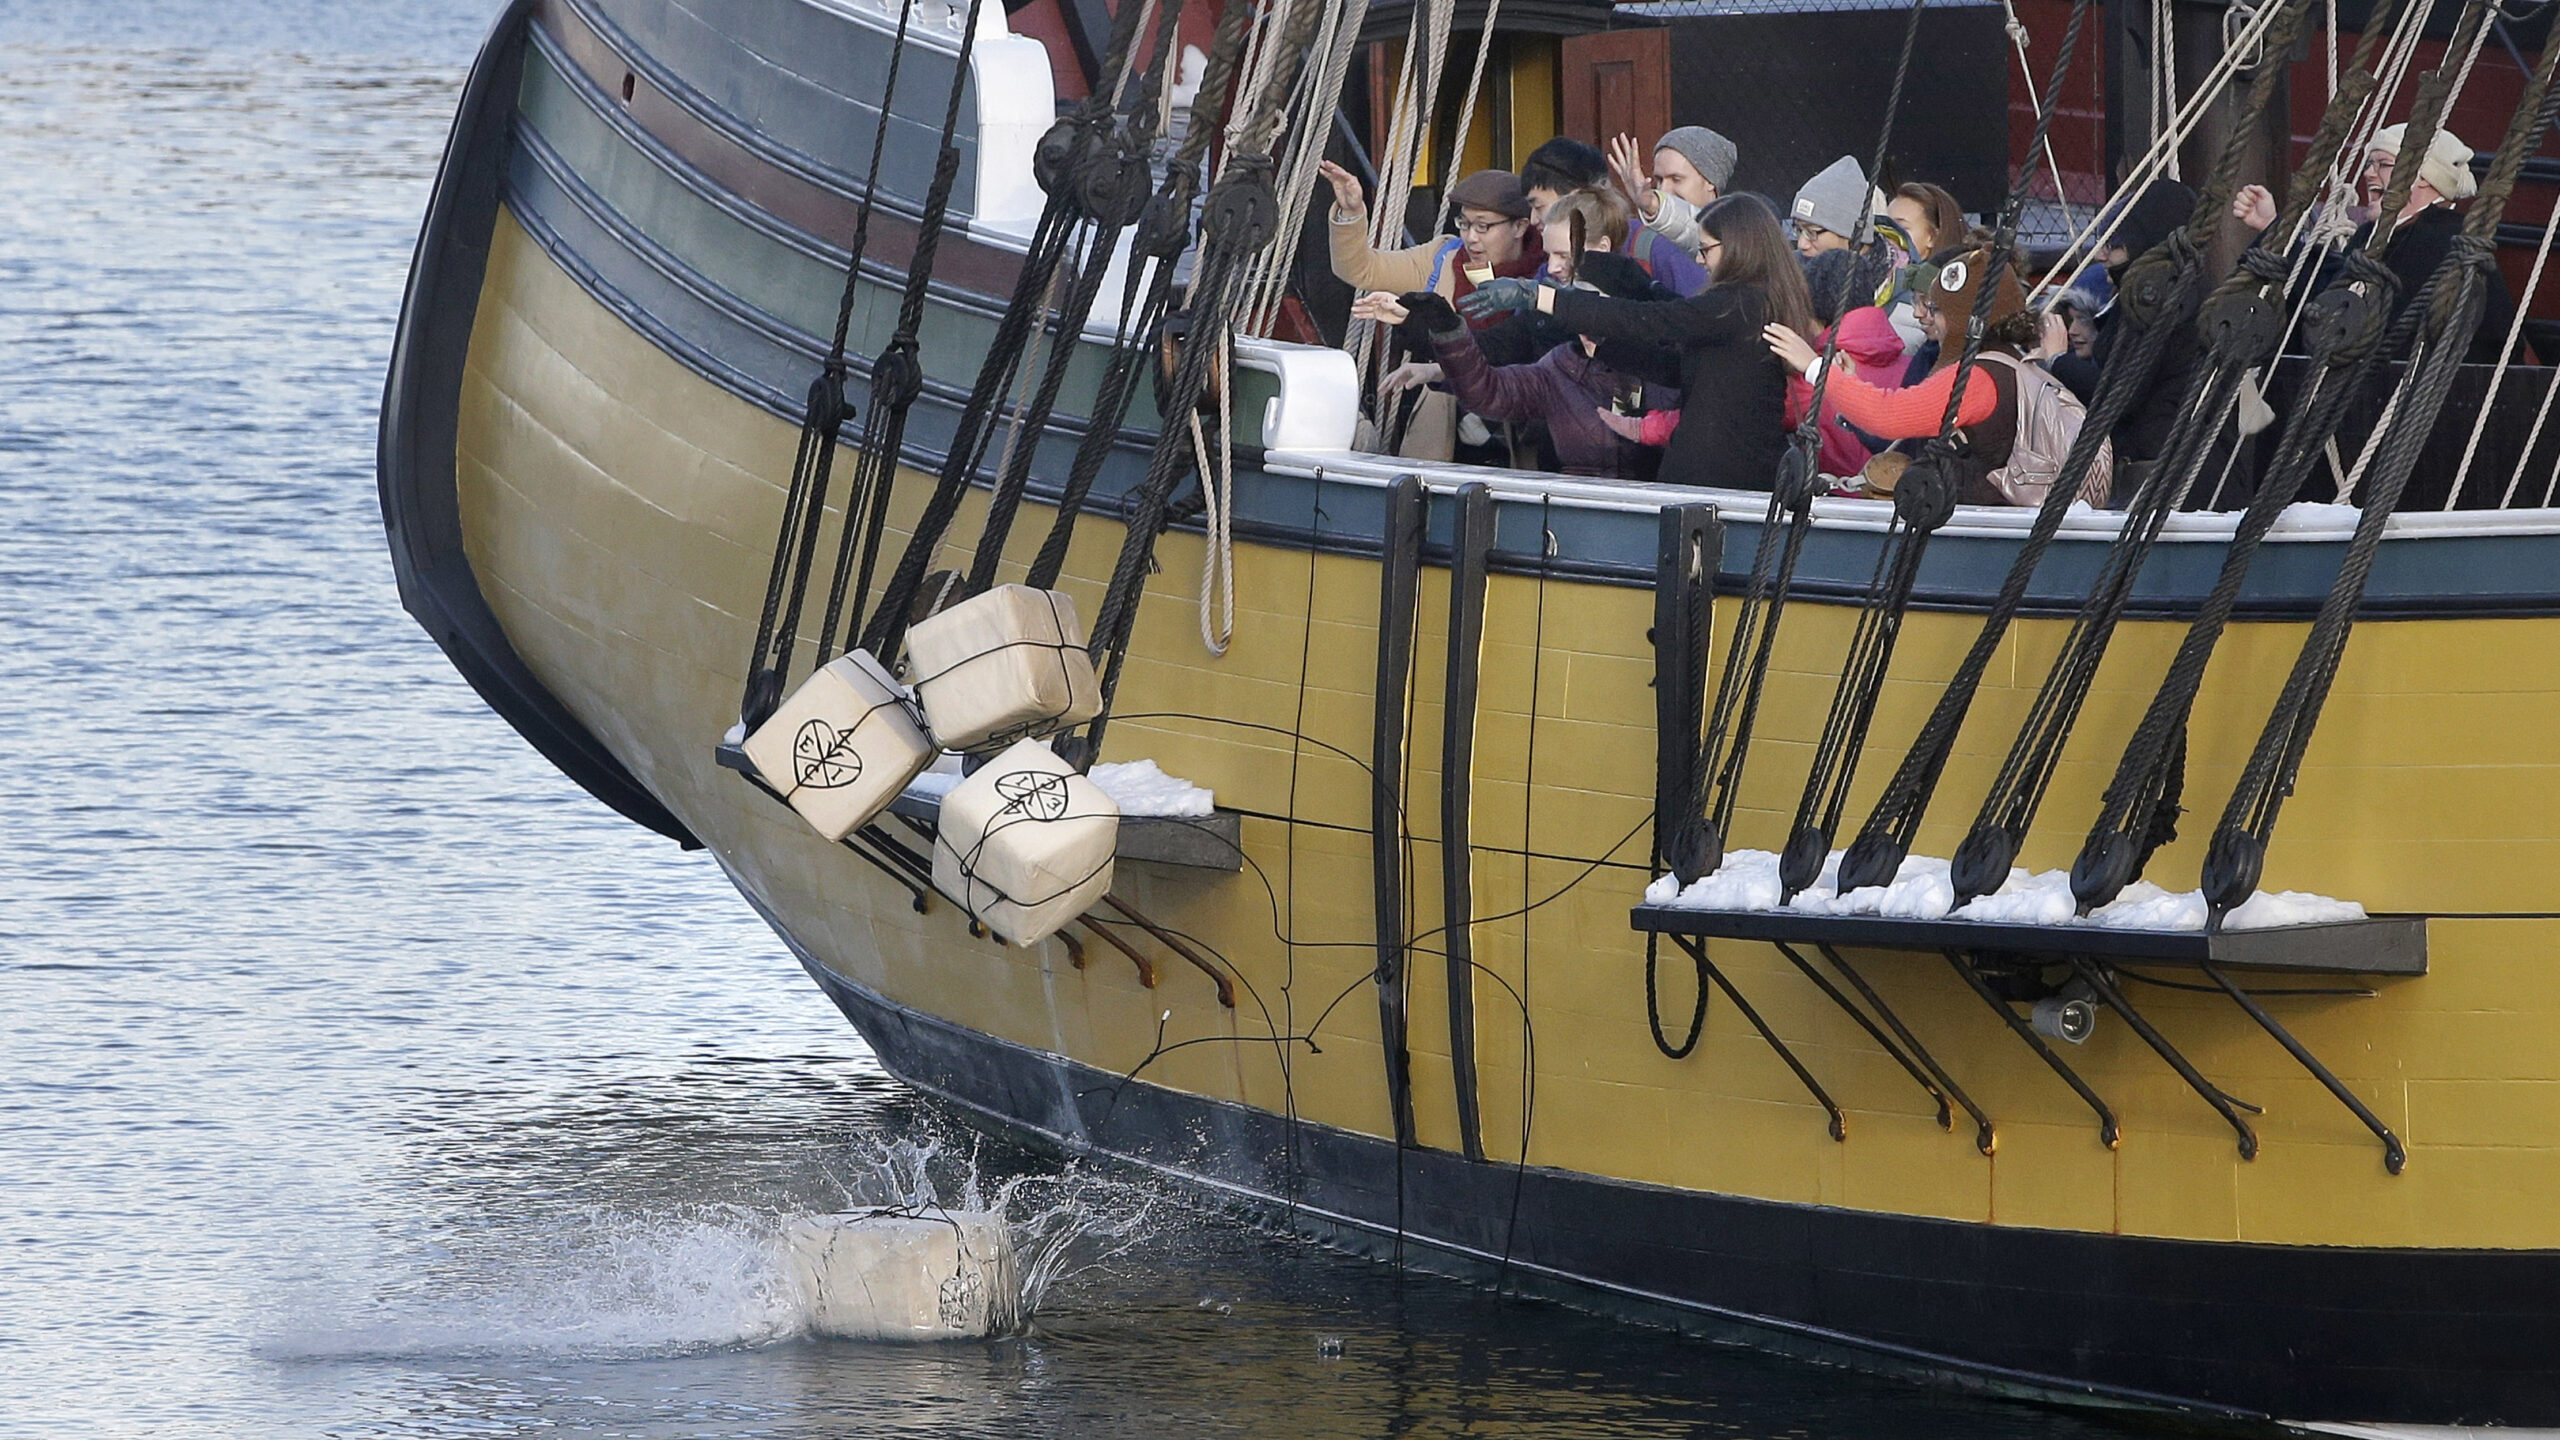 visitors to the Boston Tea Party Museum throw replicas of historic tea containers into Boston Harbo...